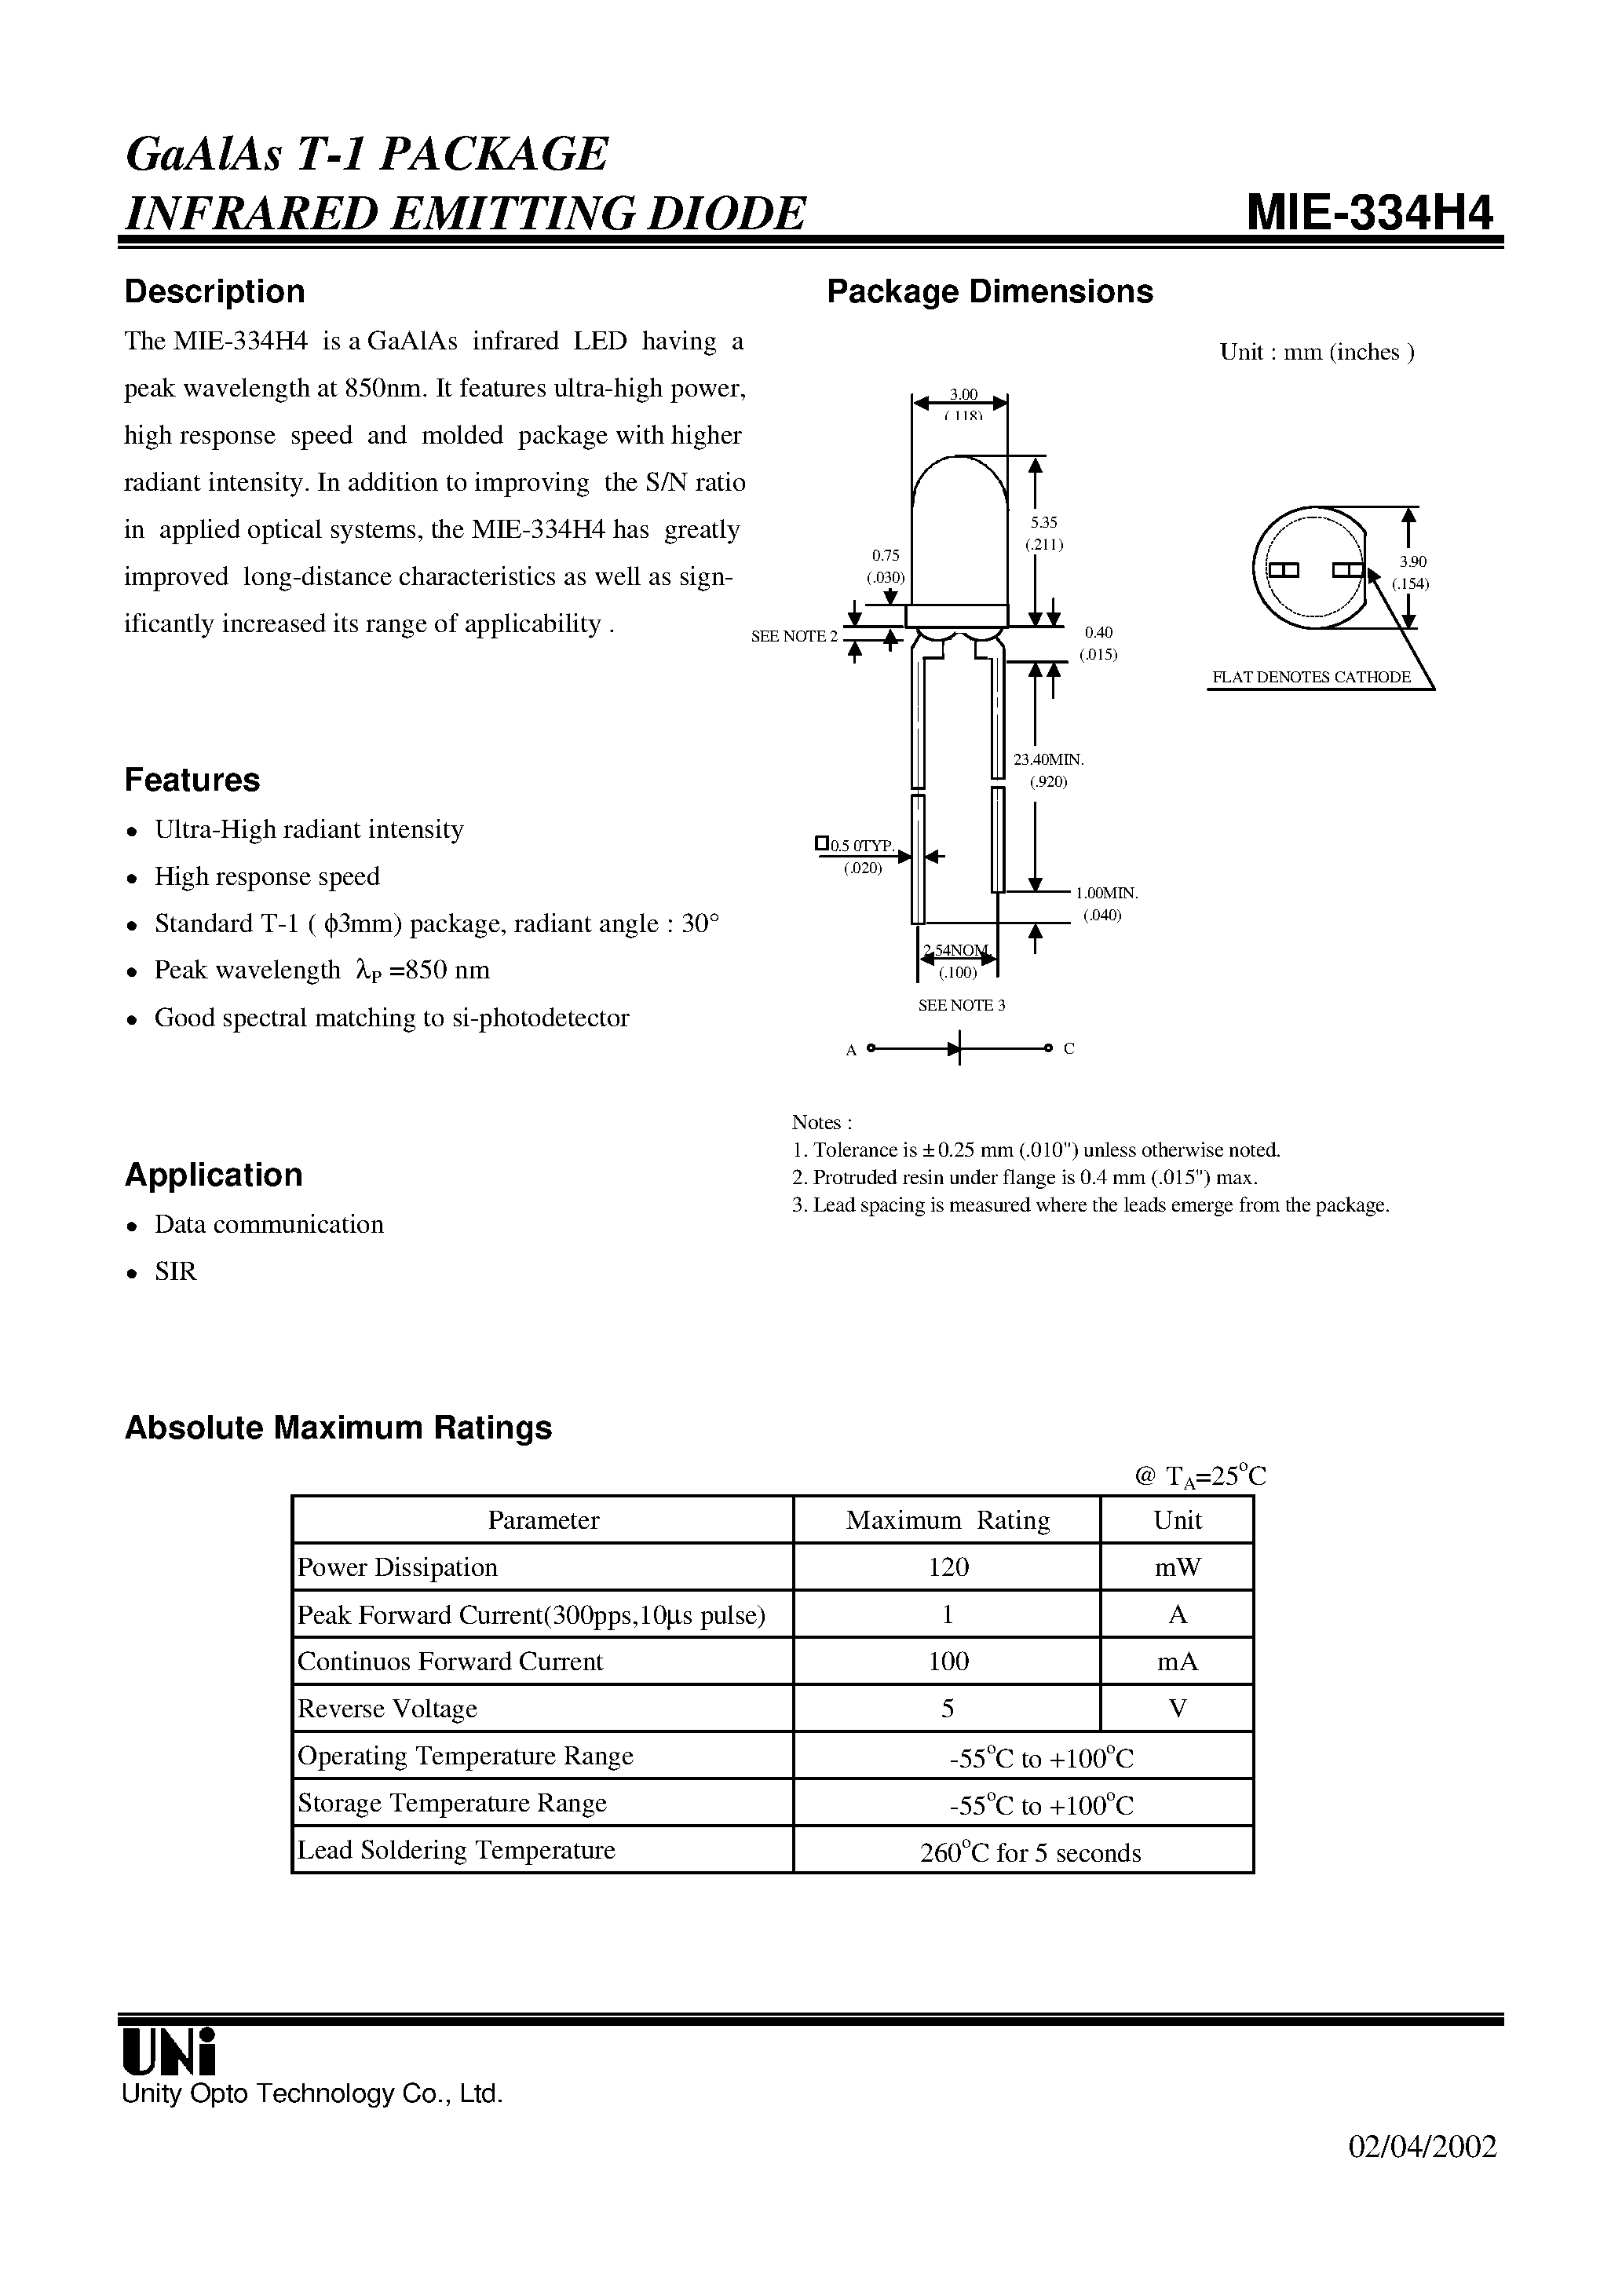 Datasheet MIE-334H4 - GaAlAs T-1 PACKAGE INFRARED EMITTING DIODE page 1